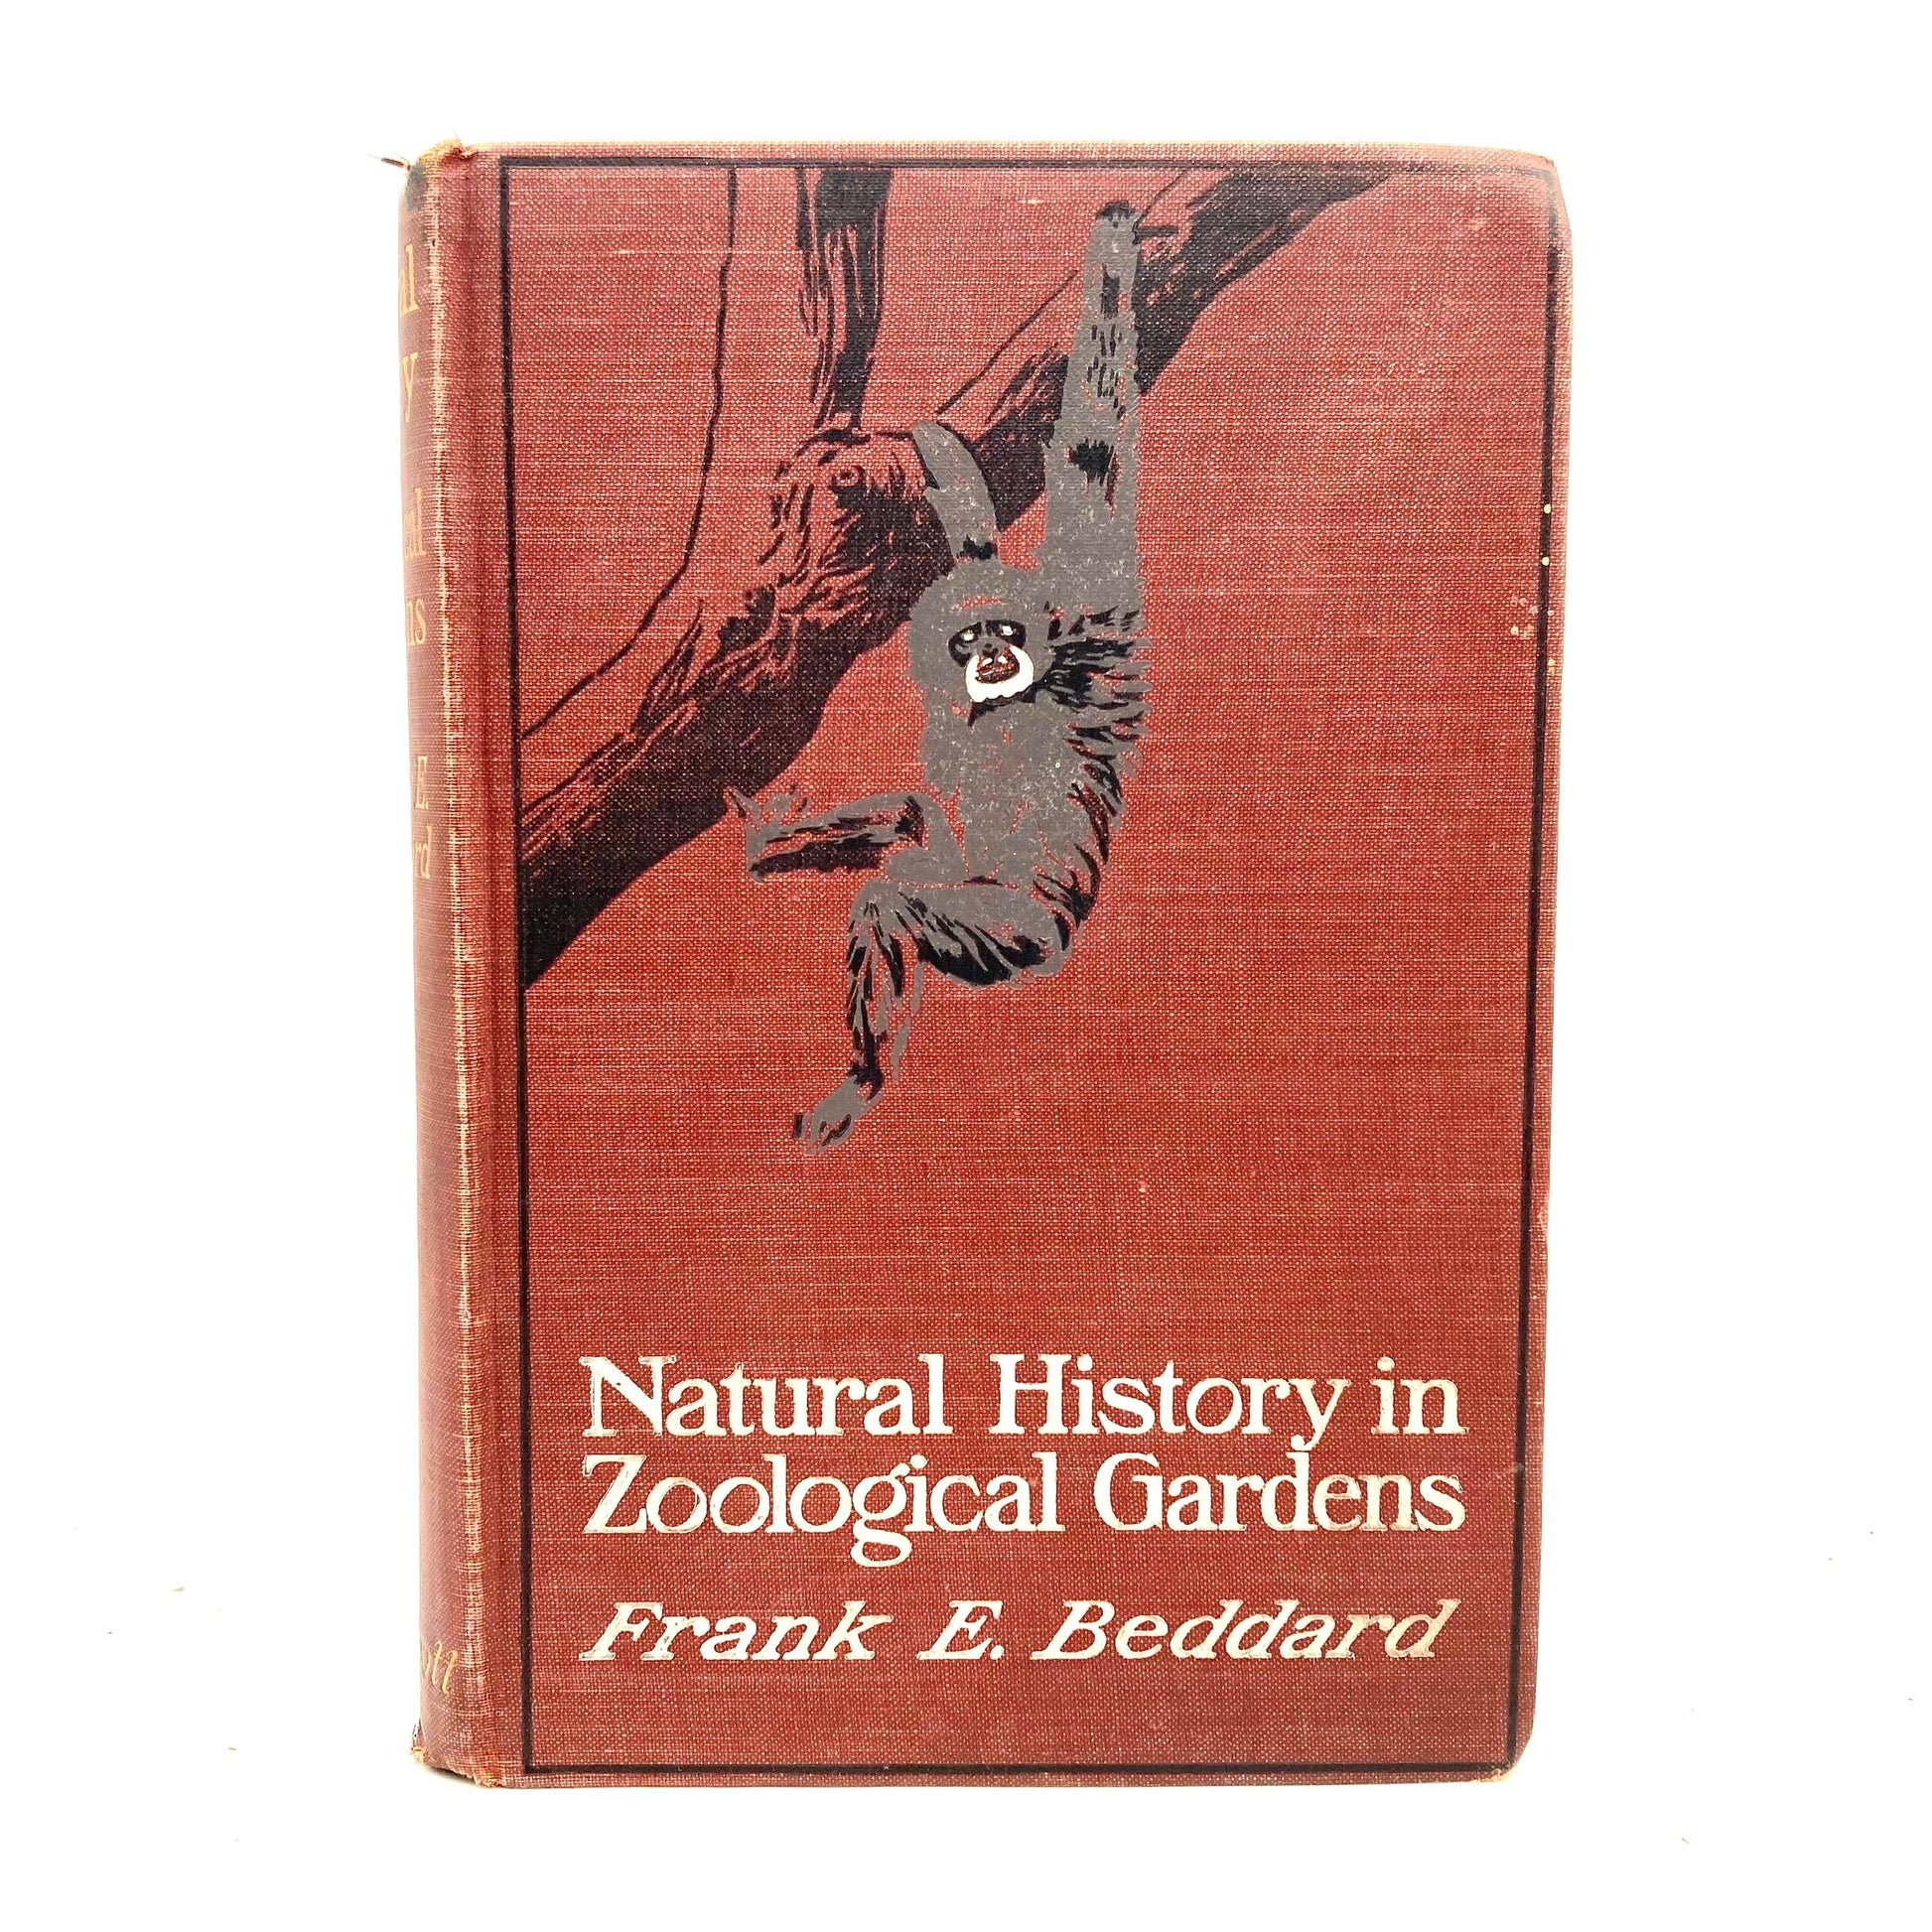 BEDDARD, Frank E. "Natural History in Zoological Gardens" [Lippincott, 1905] - Buzz Bookstore